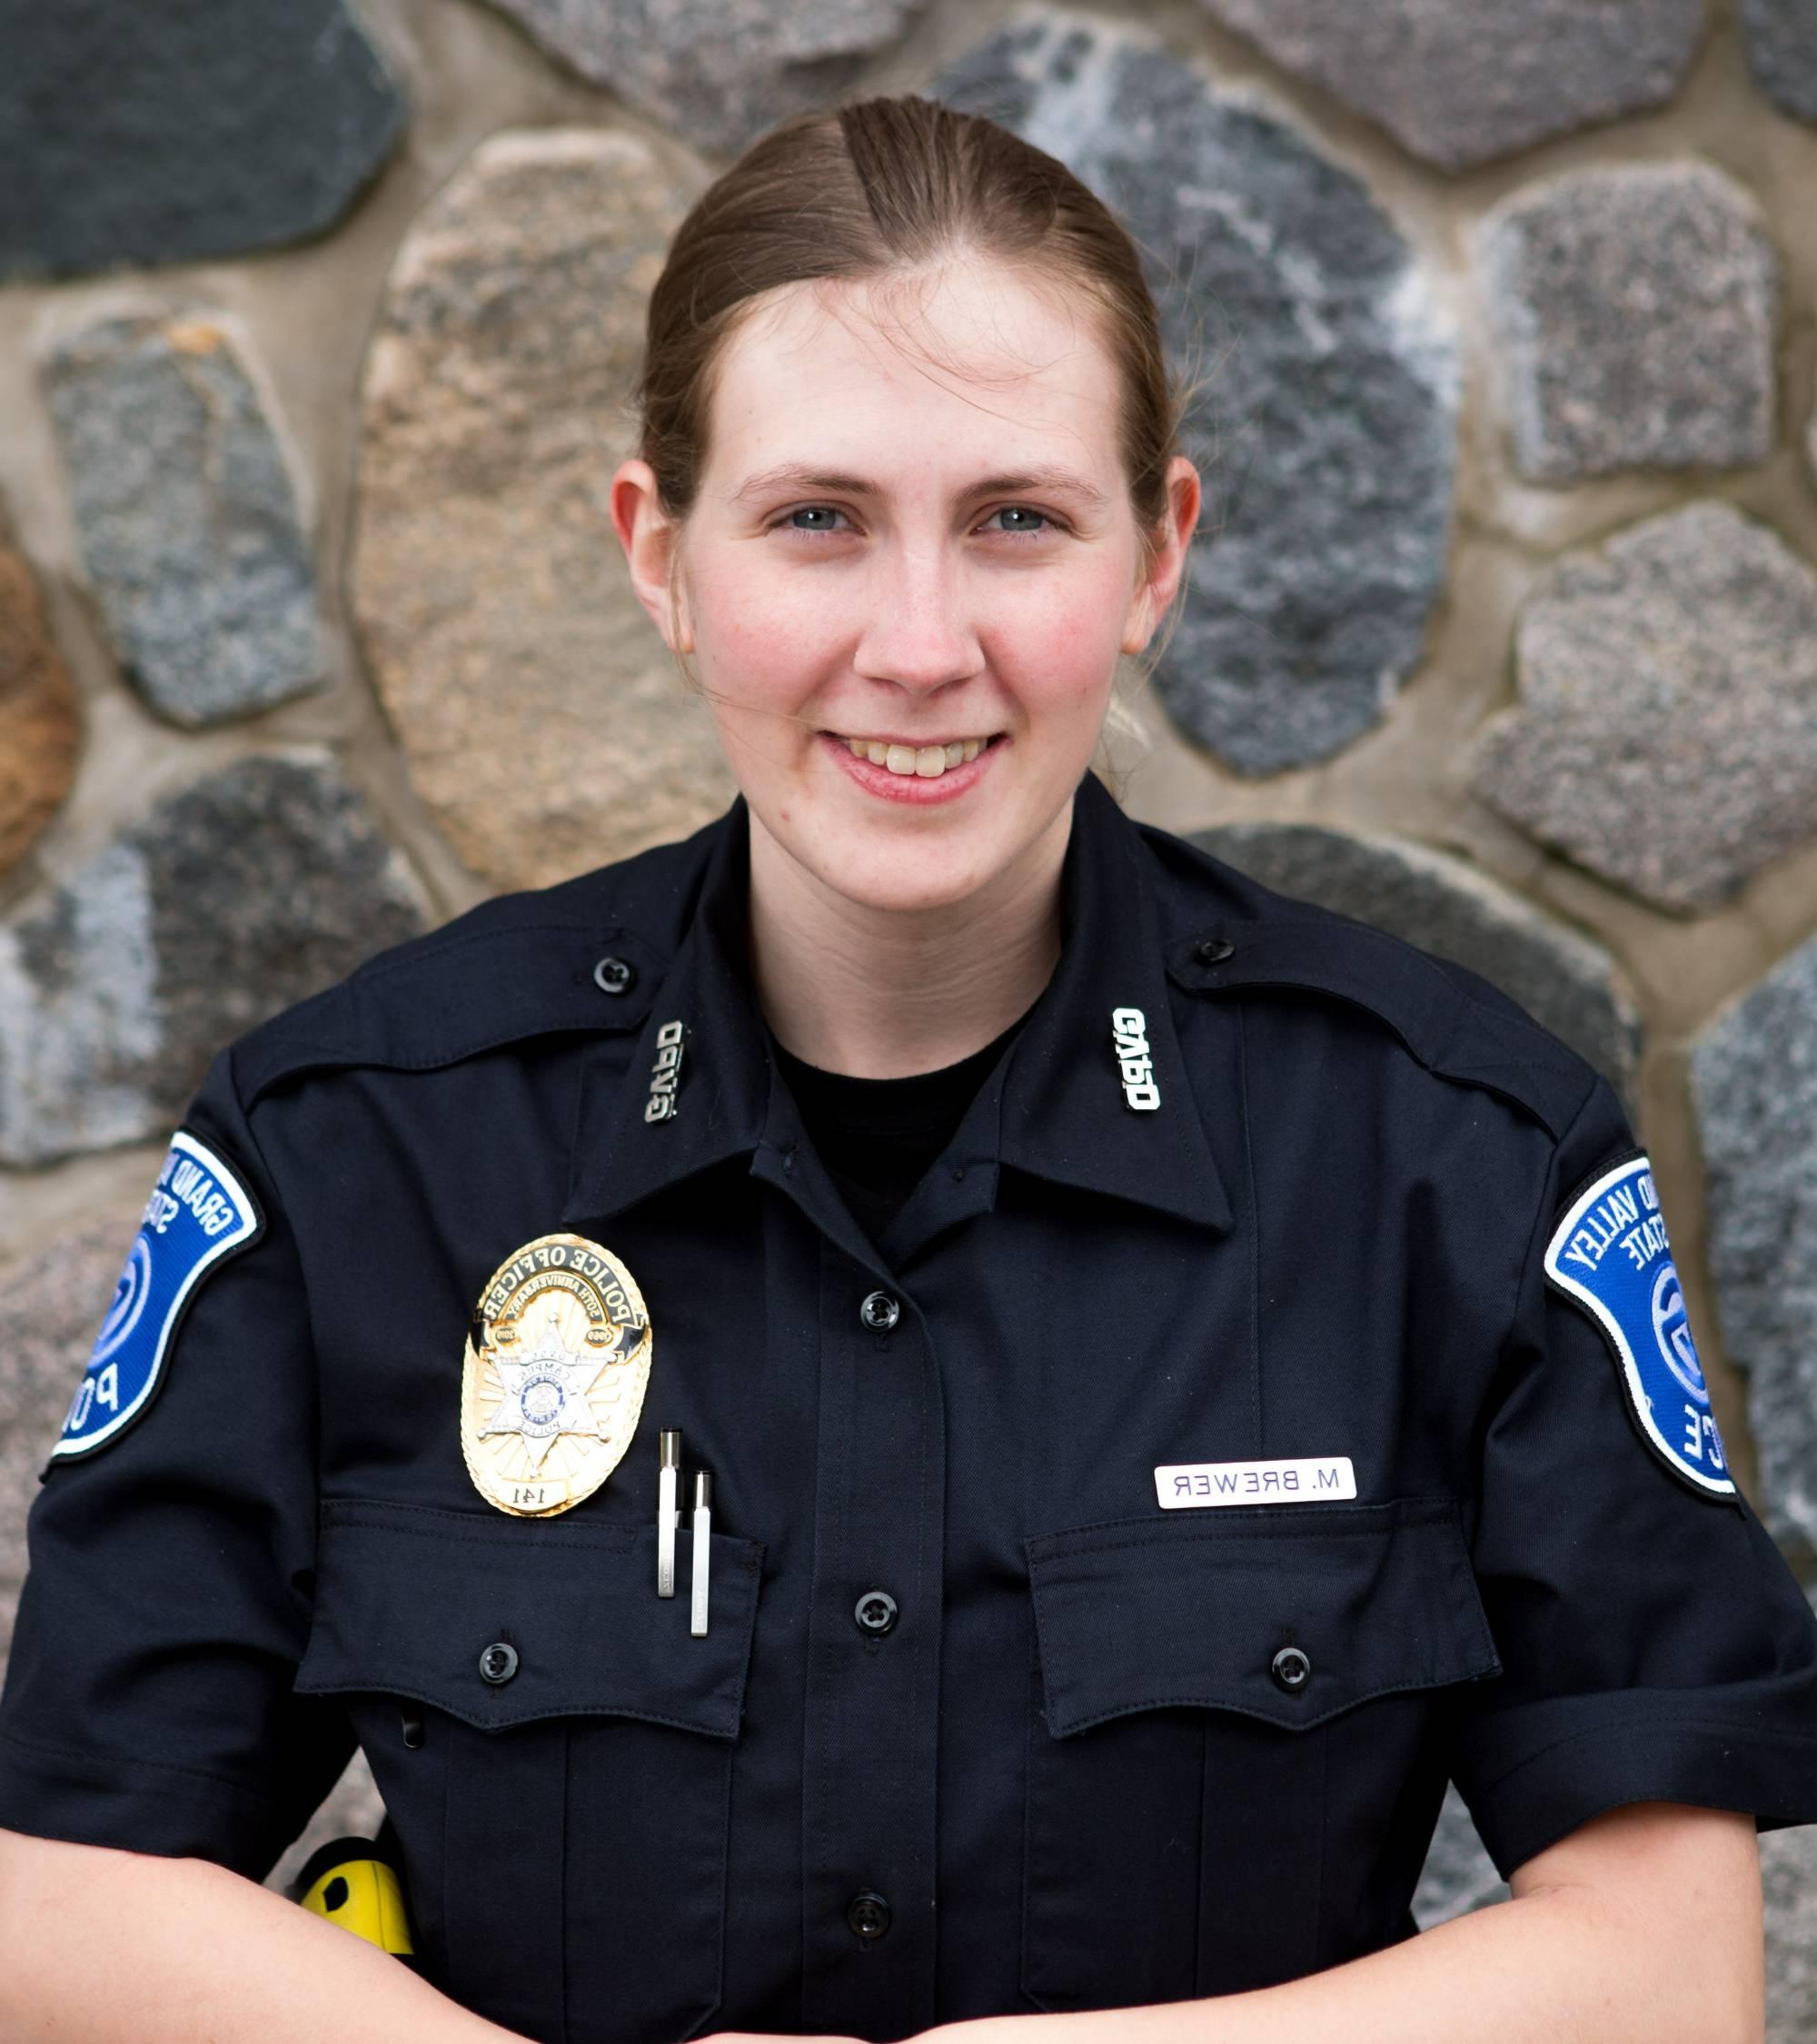 Community Police Officer Brewer